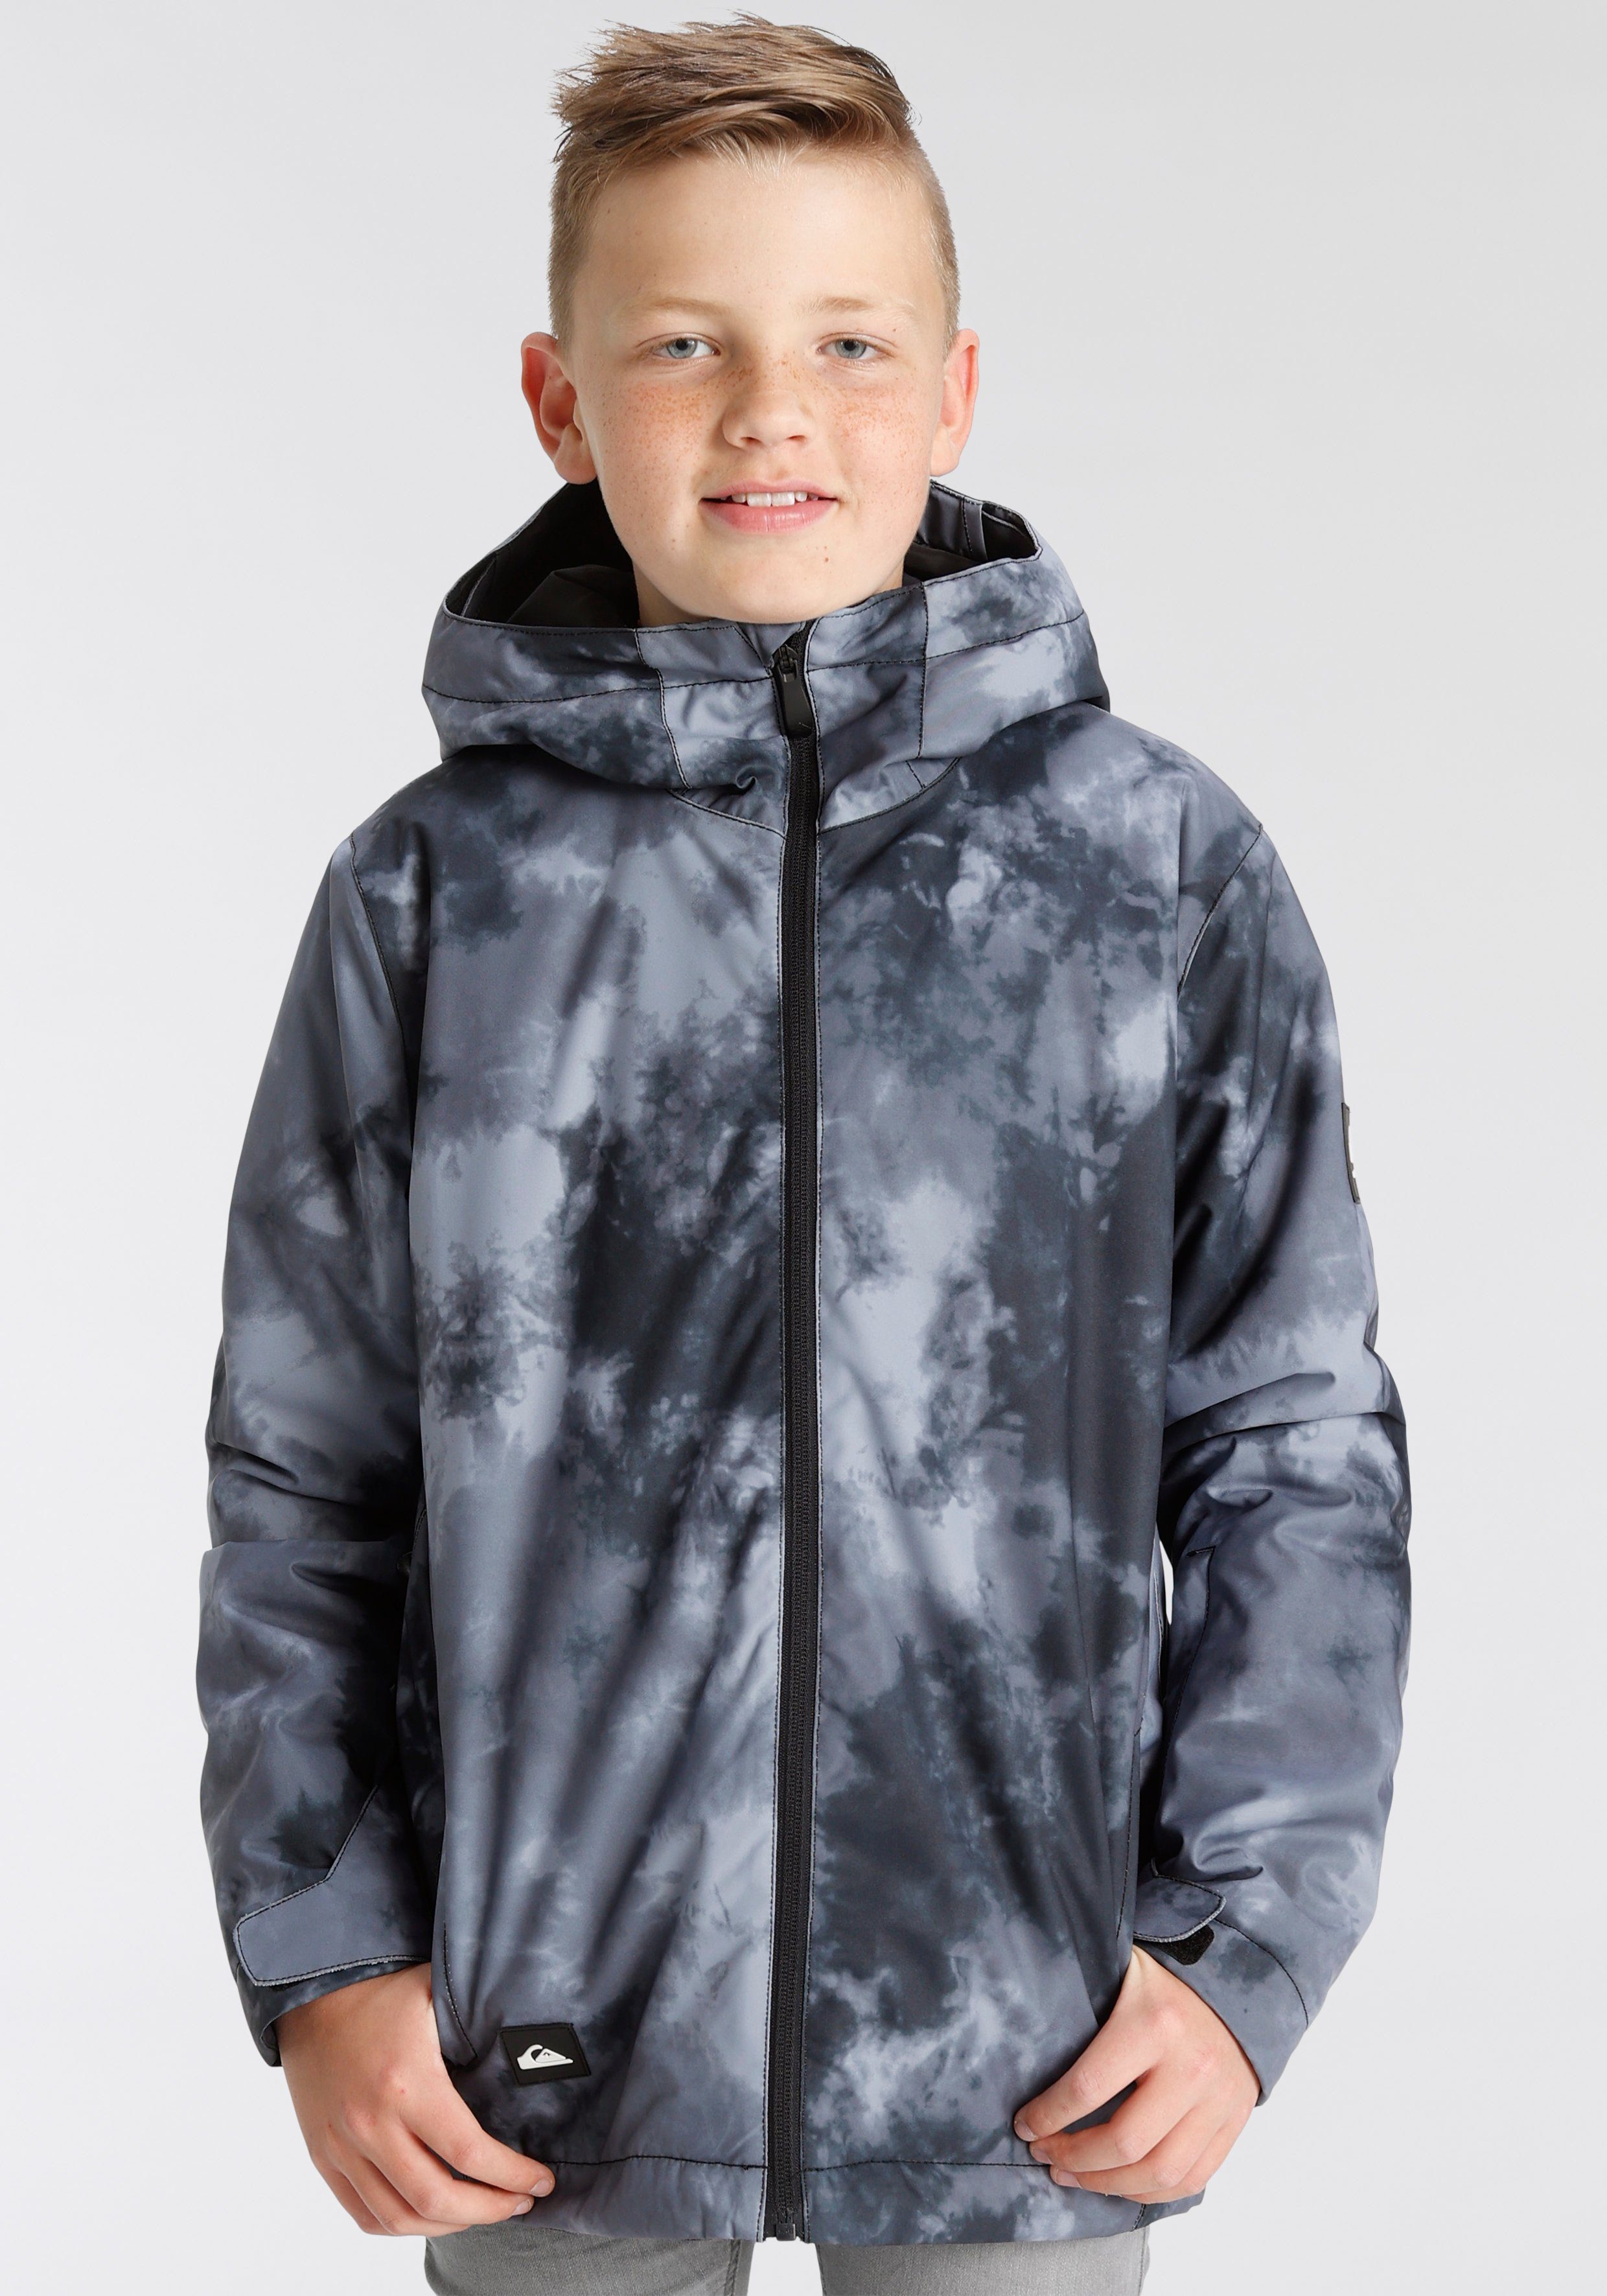 Quiksilver Outdoorjacke MISSION PRINTED YOUTH JACKET